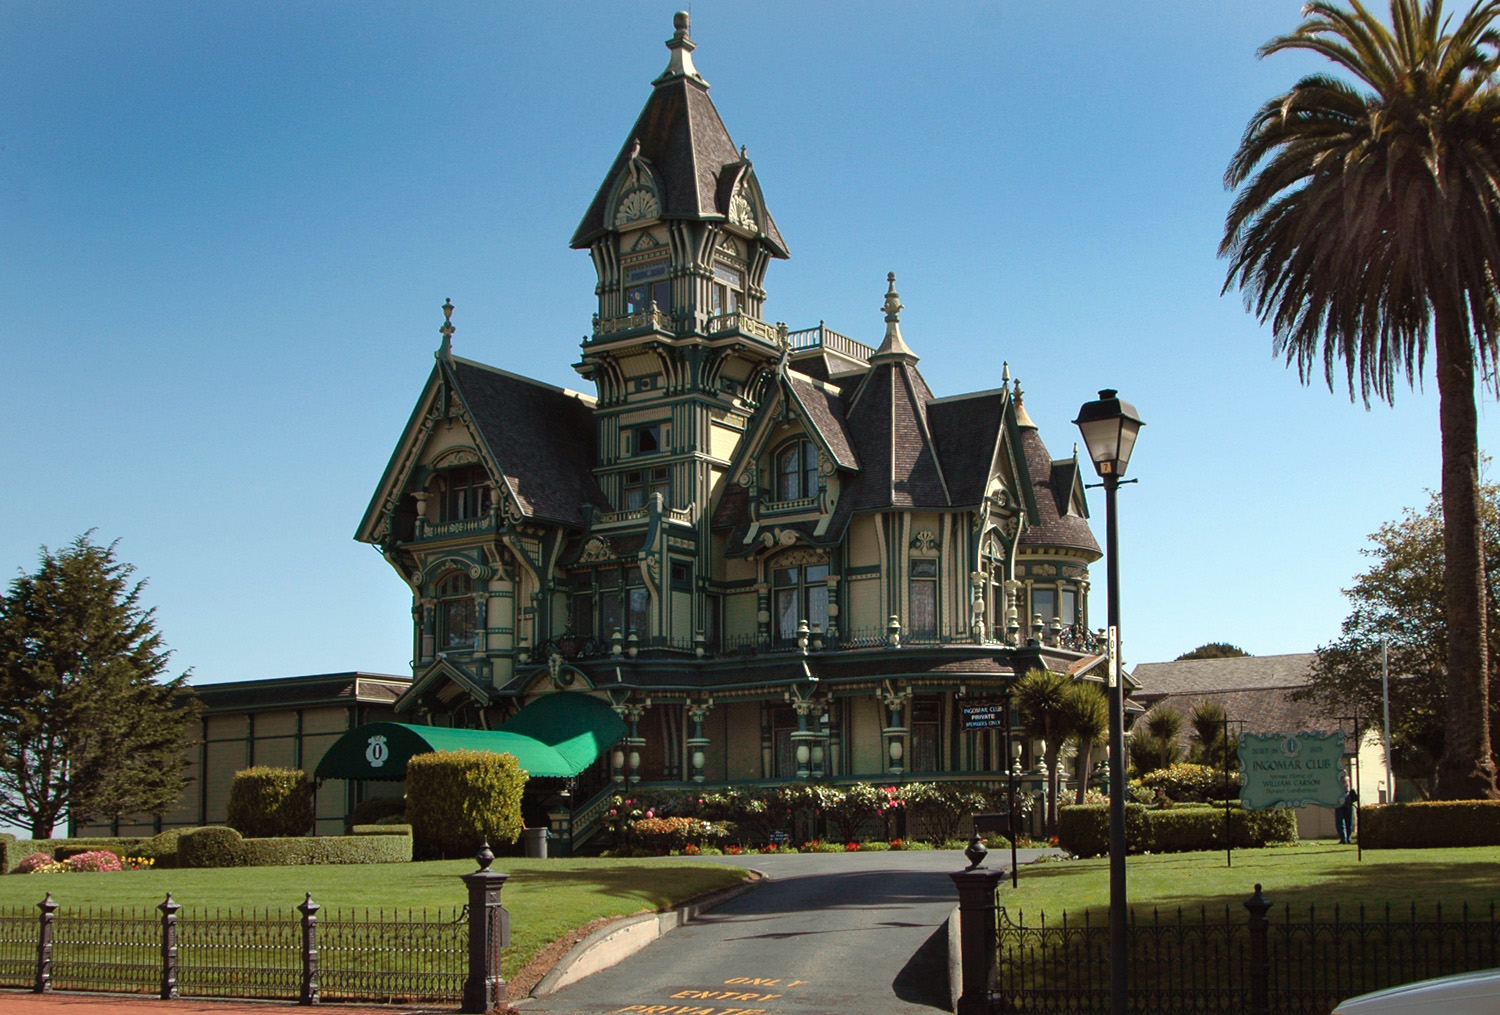 The real Carson Mansion, photo by Cory Maylett, is a more welcoming place.